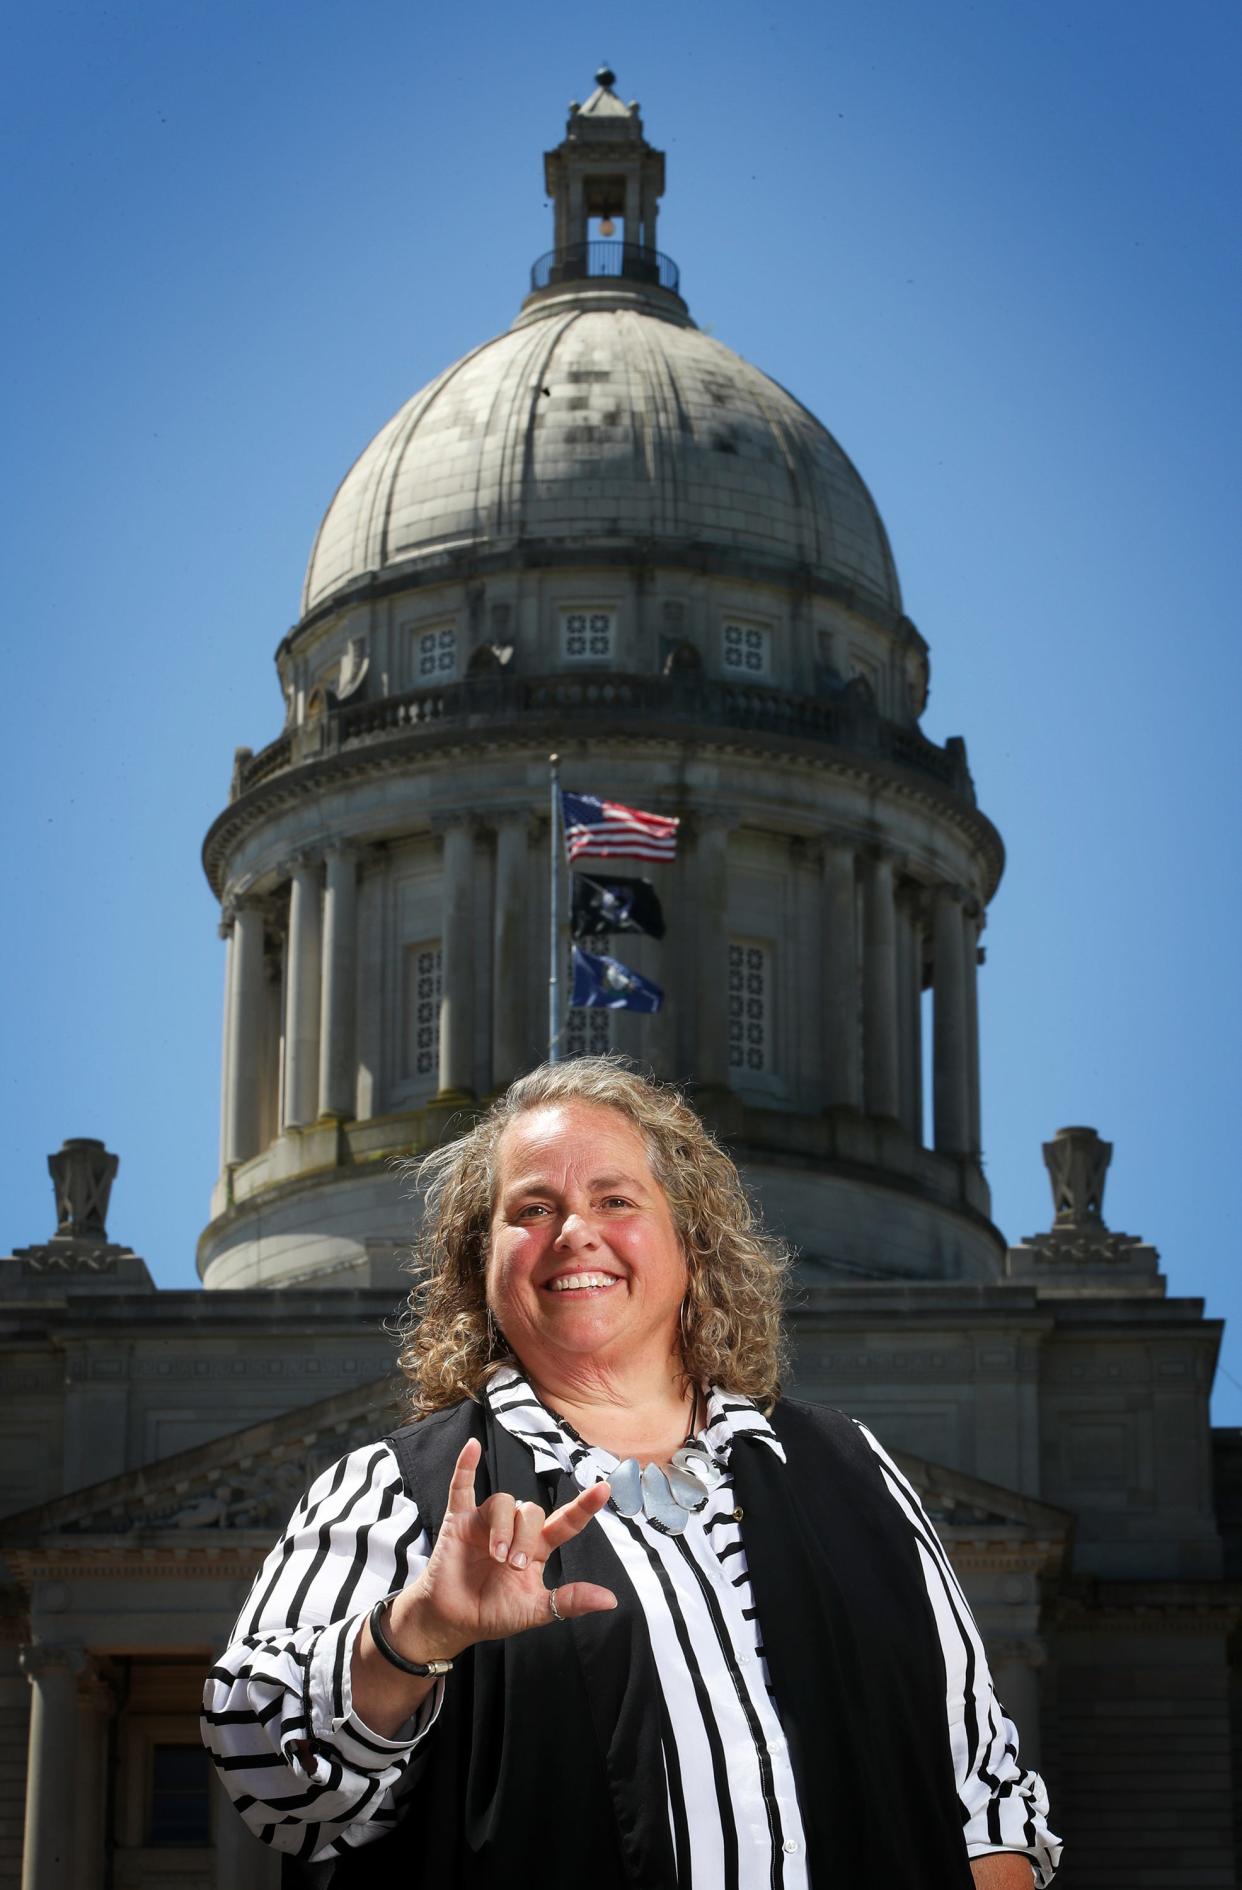 Virginia Moore, Executive Director of the Kentucky Commission on the Deaf and Hard of Hearing signs "I Love You".